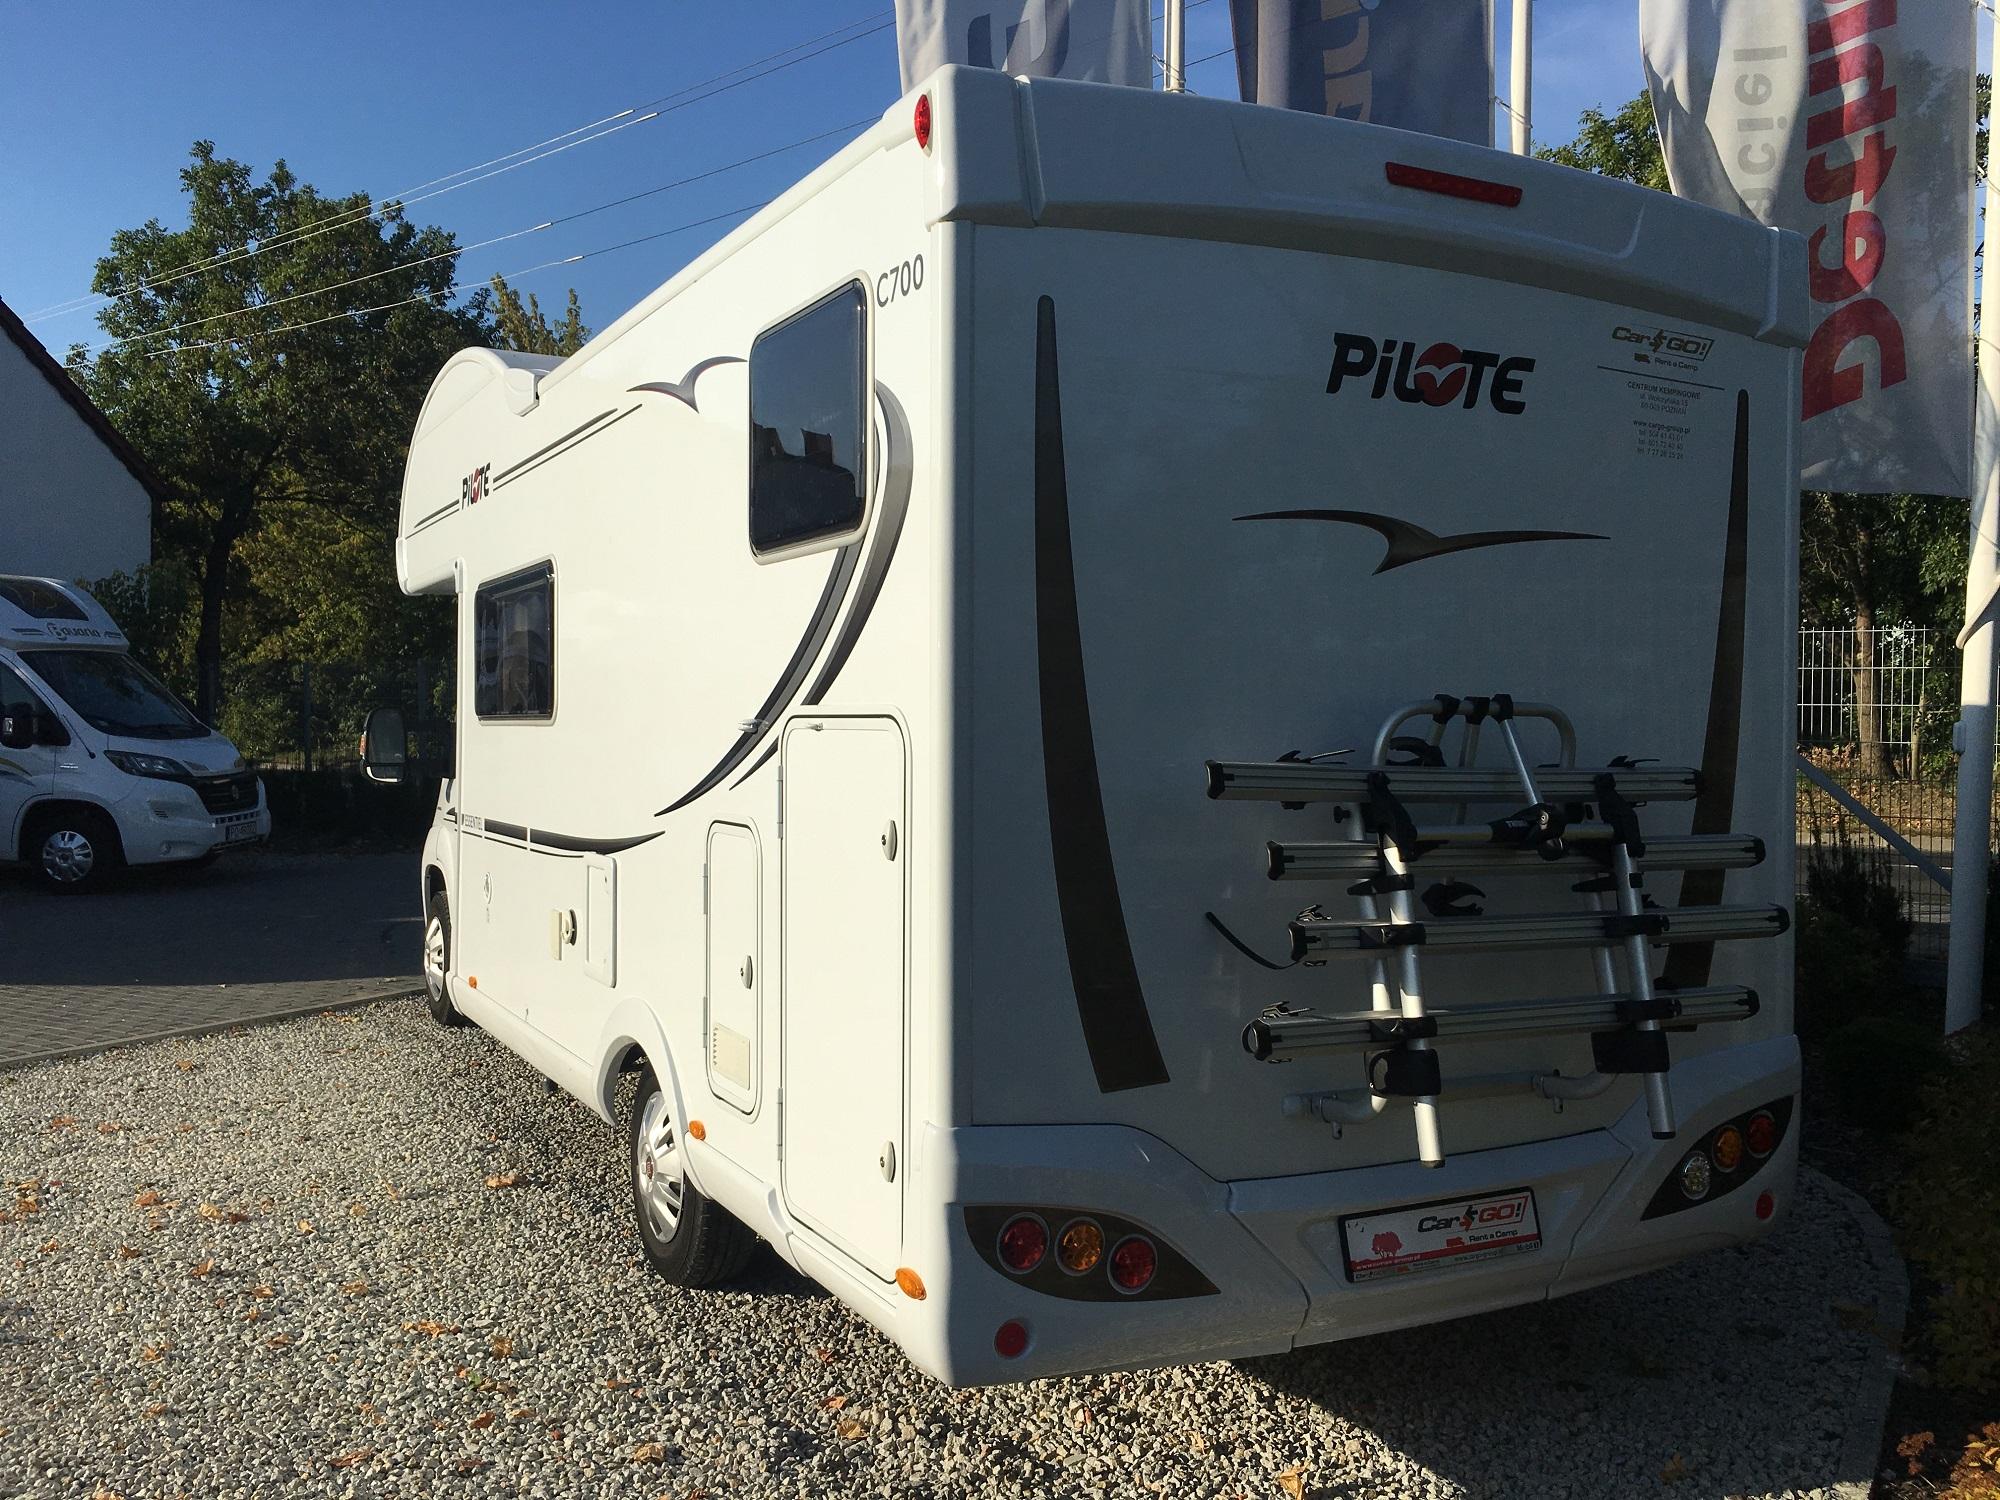 Family motorhome with an alcove by Pilote – image 1